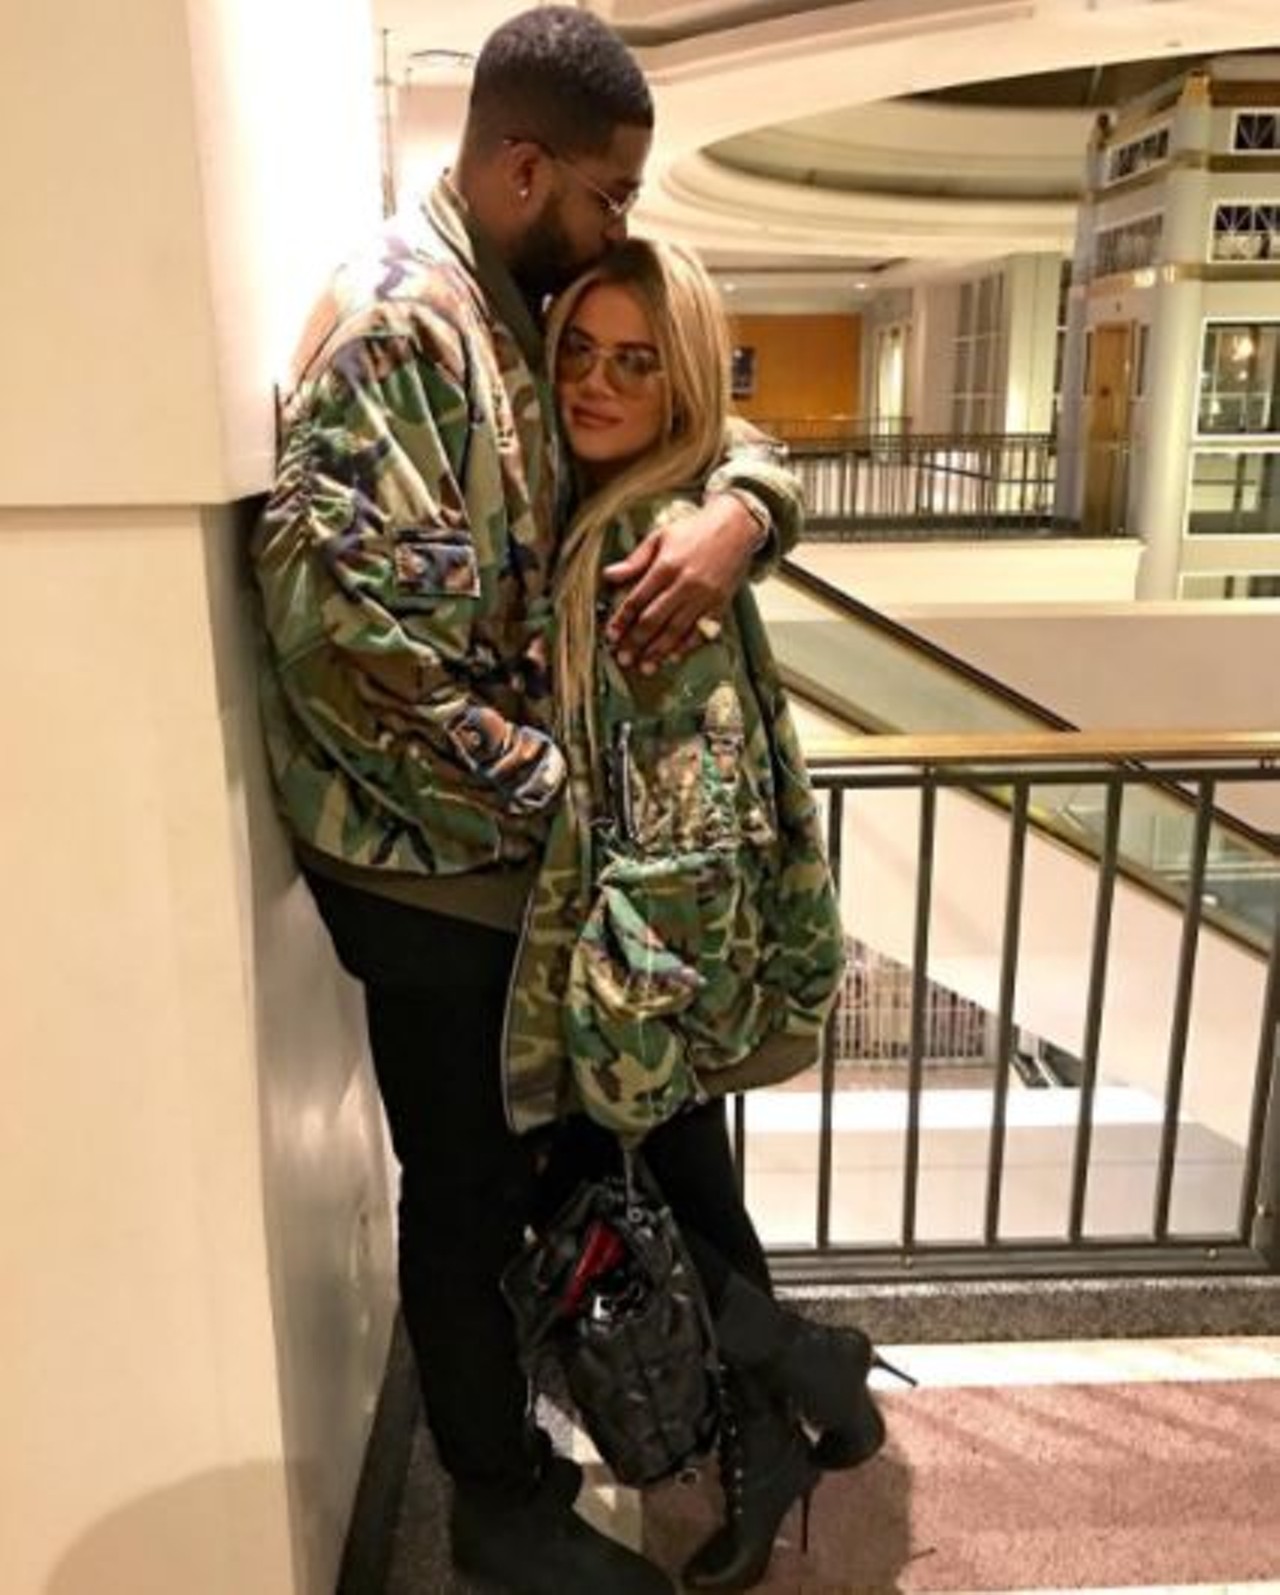  "Khloe Kardashian Loves &#145;Domestic Family Life&#146; in Cleveland"
Feb. 16
Not even the Kardashians are immune to the charms of Cleveland, as evidenced by Khloe professing her love for the city in February. Would she be here if she wasn't dating Cavs player Tristan Thompson? Probably not, but that's OK.
Photo via khloekardashian /Instagram